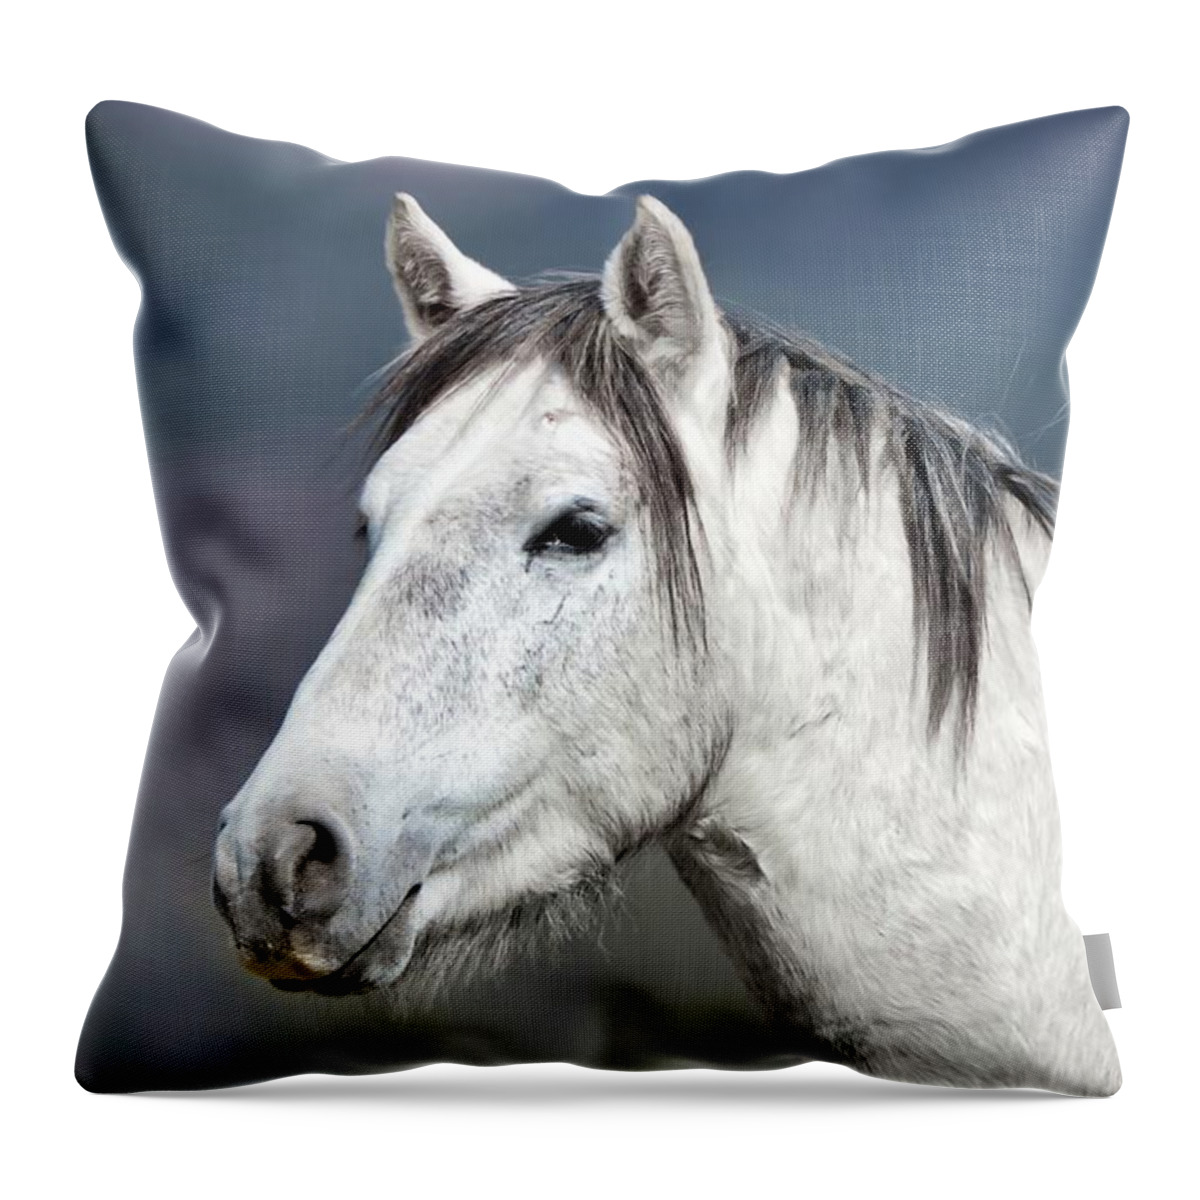 Wild Horses Throw Pillow featuring the photograph Stallion Portrait by American Landscapes